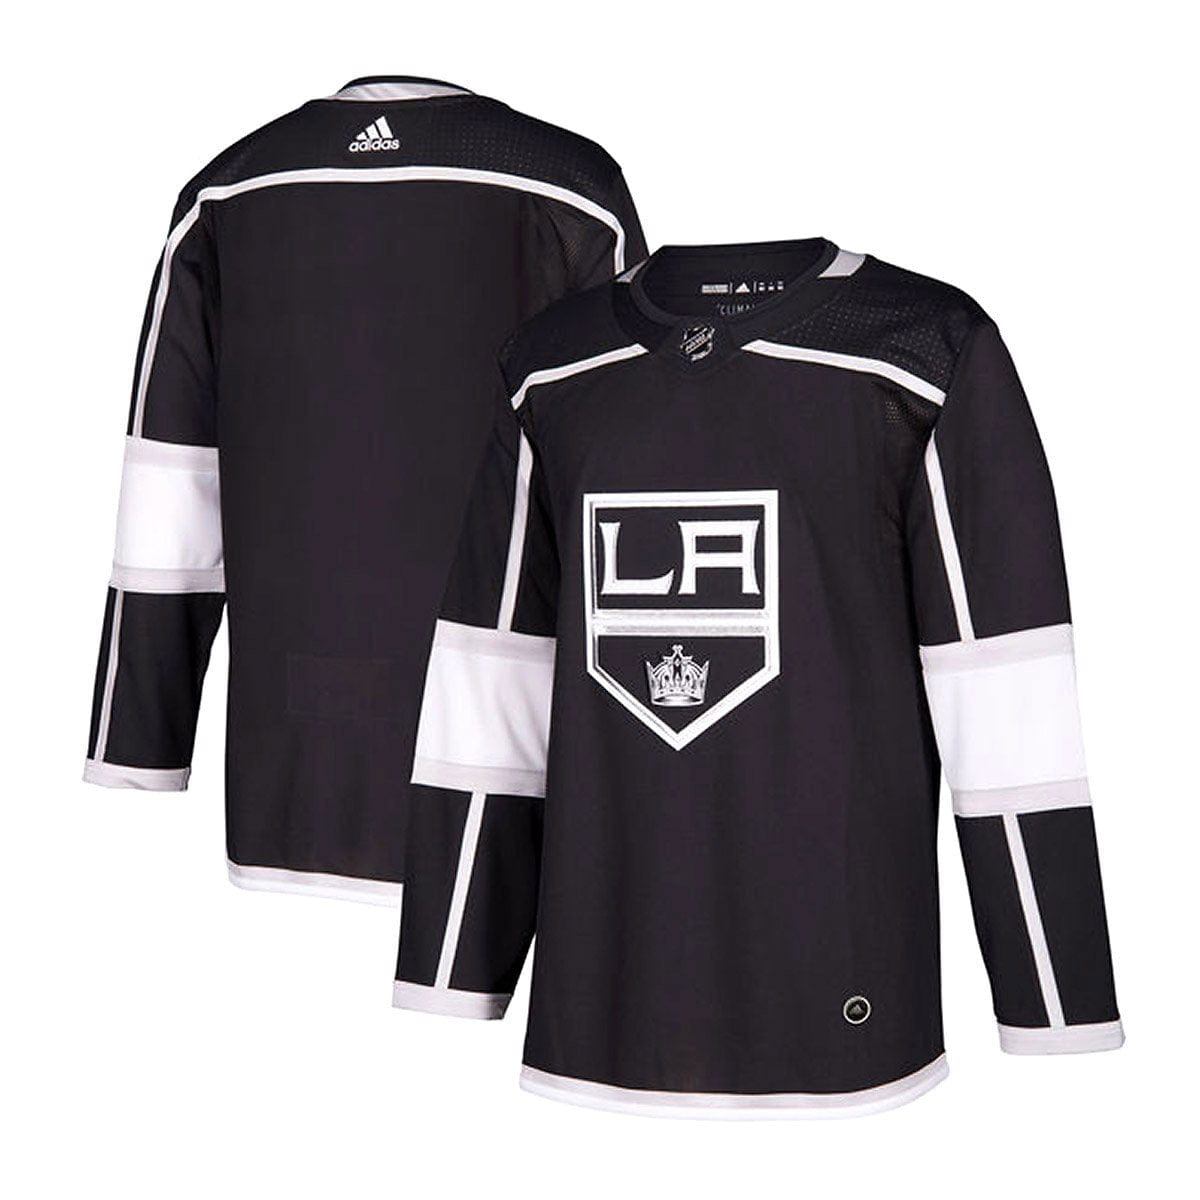 Los Angeles Kings Home Adidas Authentic Senior Jersey